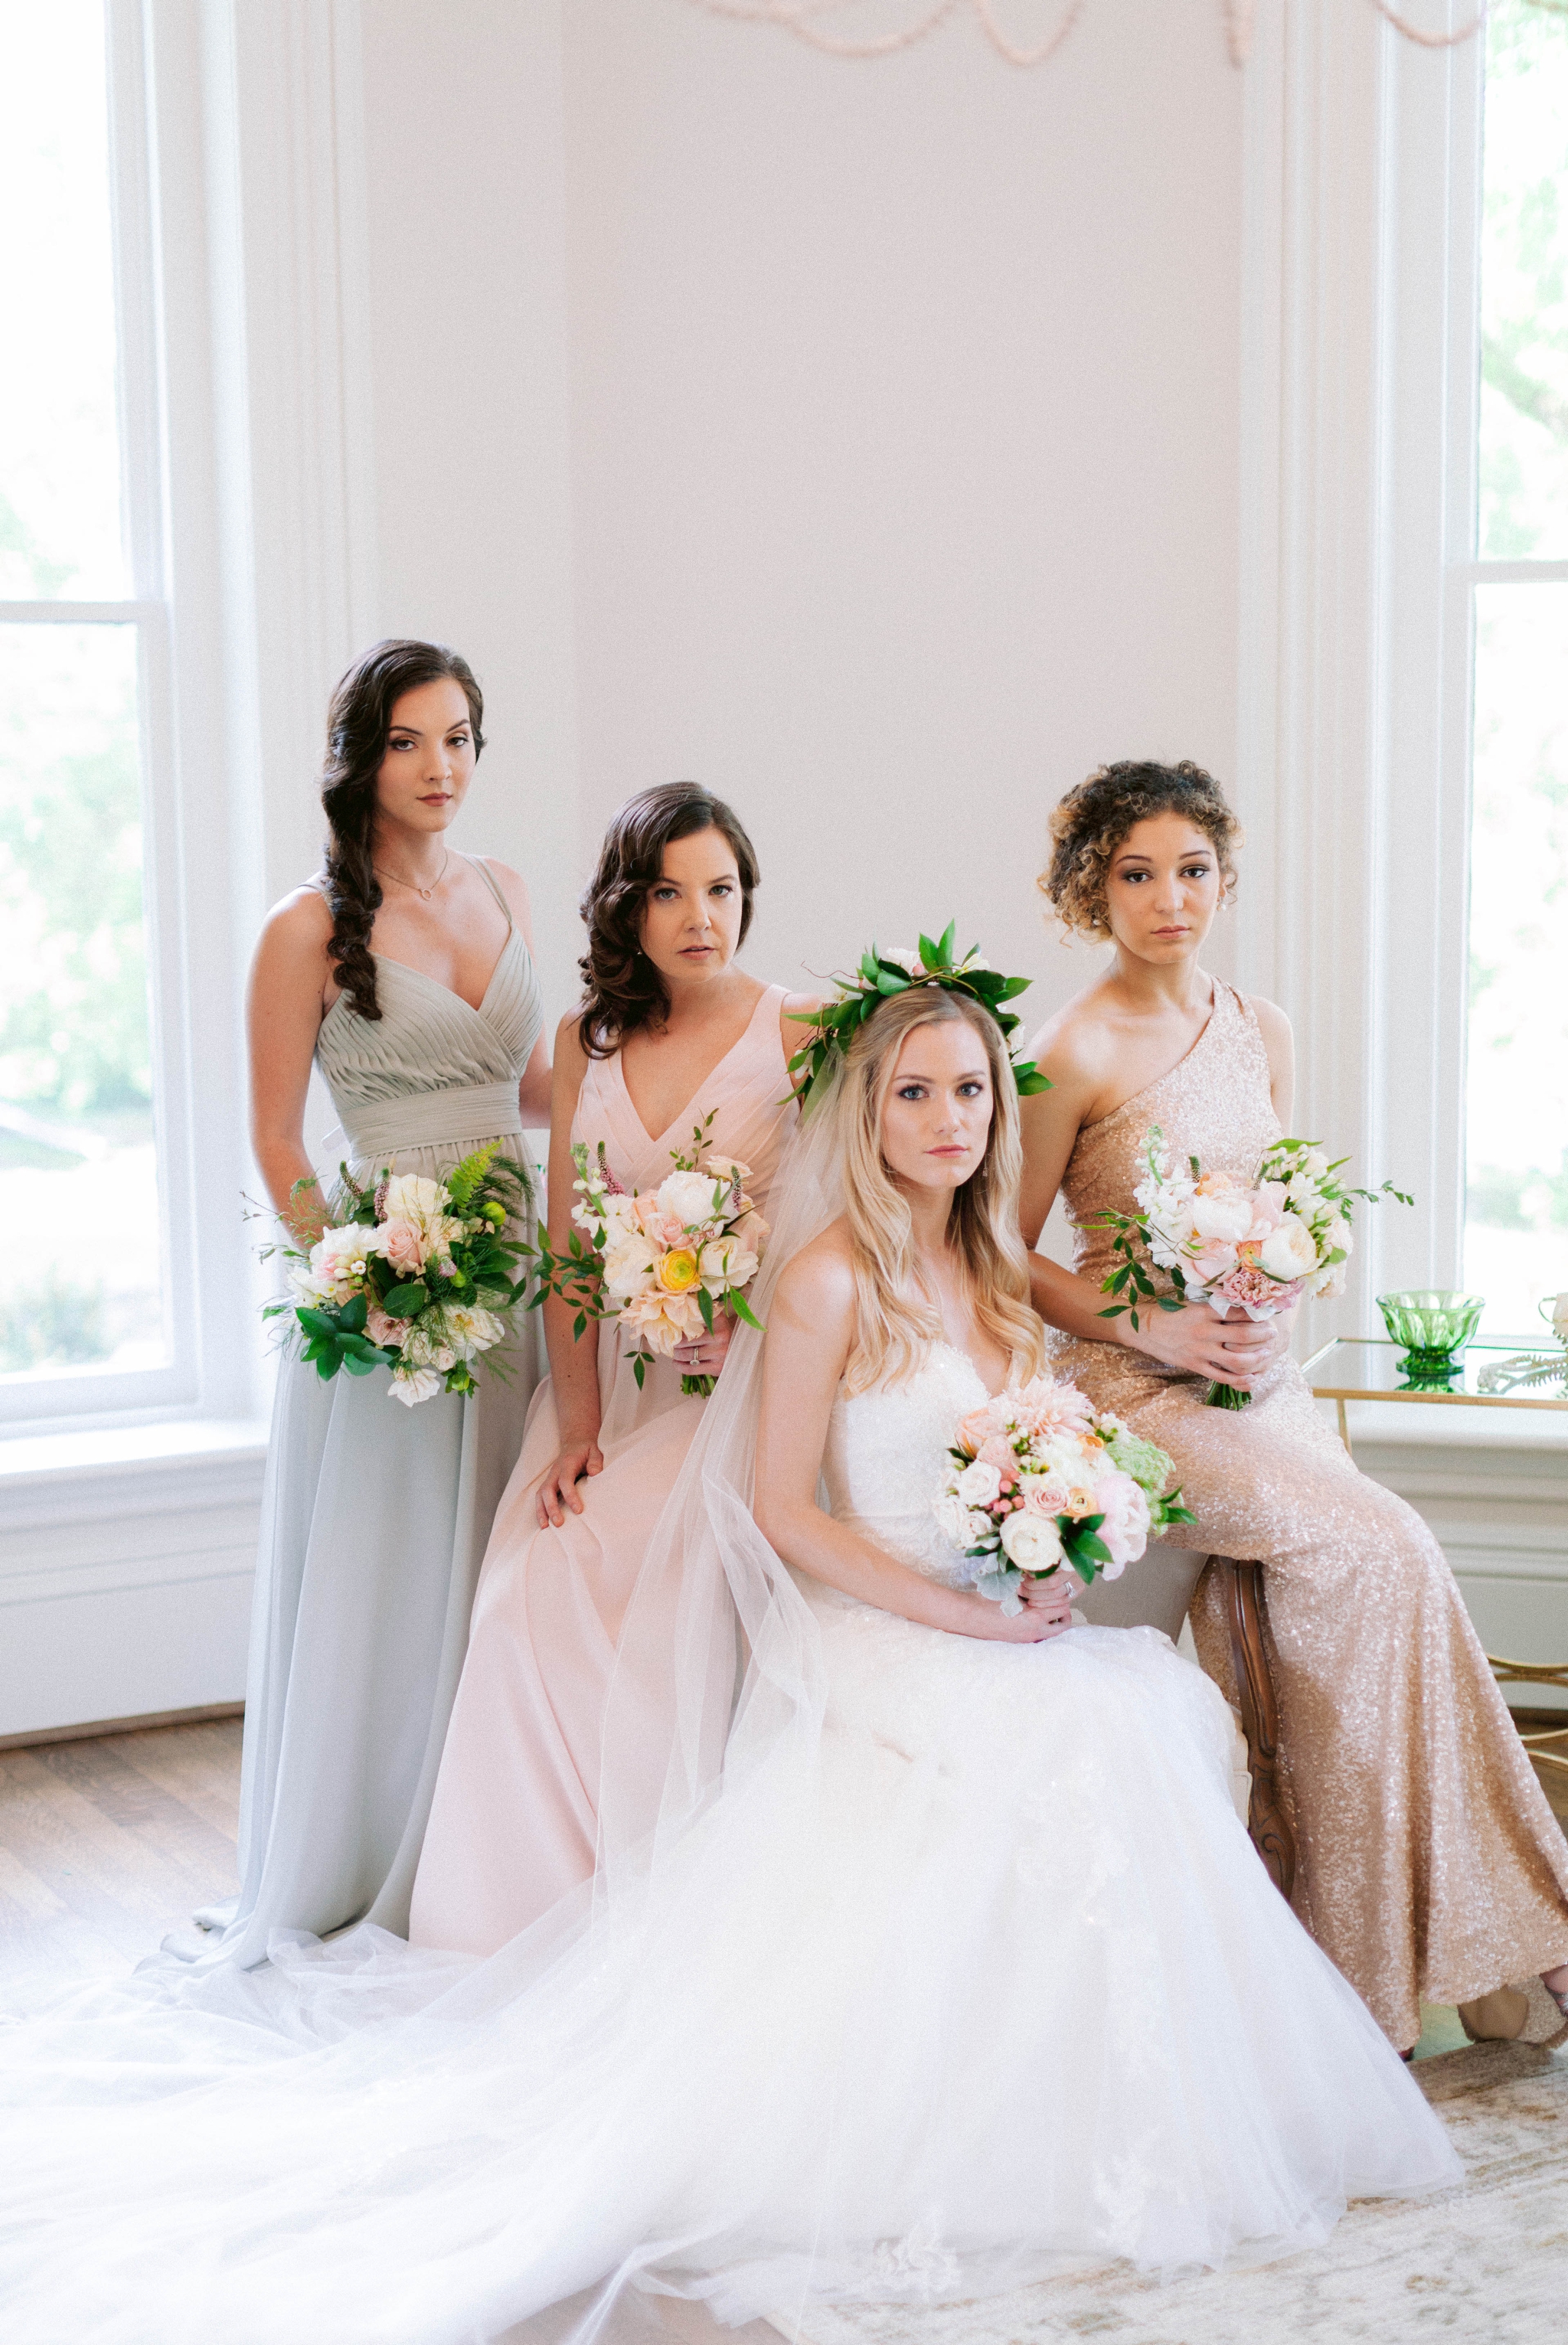  Indoor Bride + bridesmaids portraits in an all white room at a luxury estate with natural light before the ceremony sitting on a chair for an editorial shot - Bride is wearing a Hawaiian Flower Crown and a cathedral veil in a Wedding Gown by Stella 